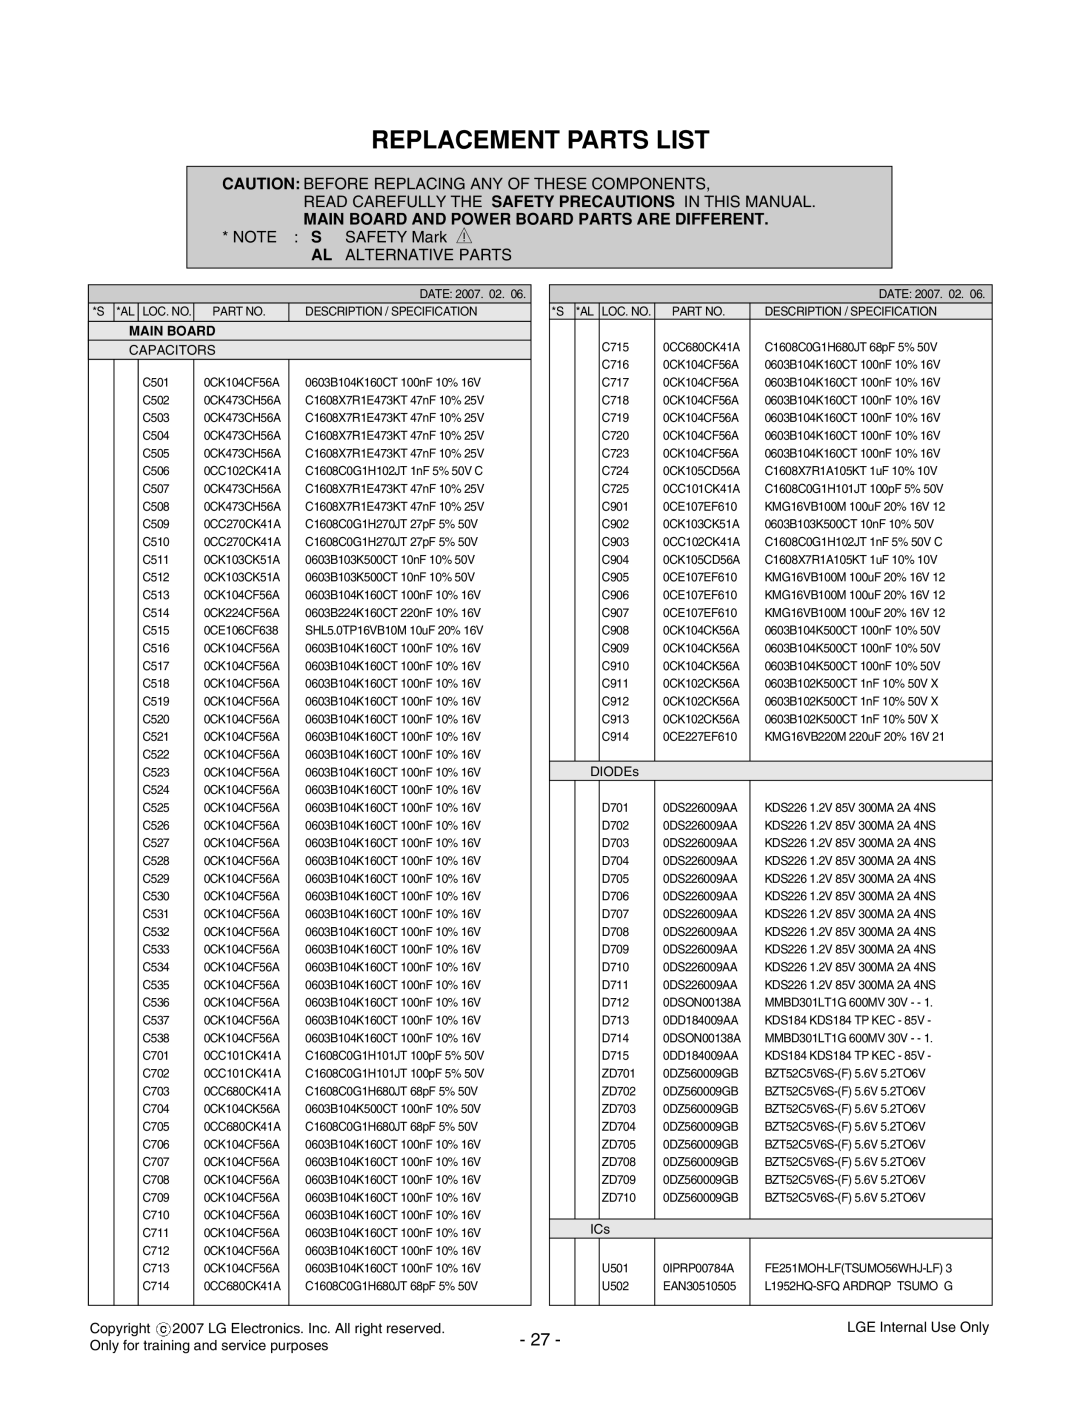 LG Electronics L1733TR Replacement Parts List, Caution: Before Replacing Any Of These Components, Note S, SAFETY Mark 